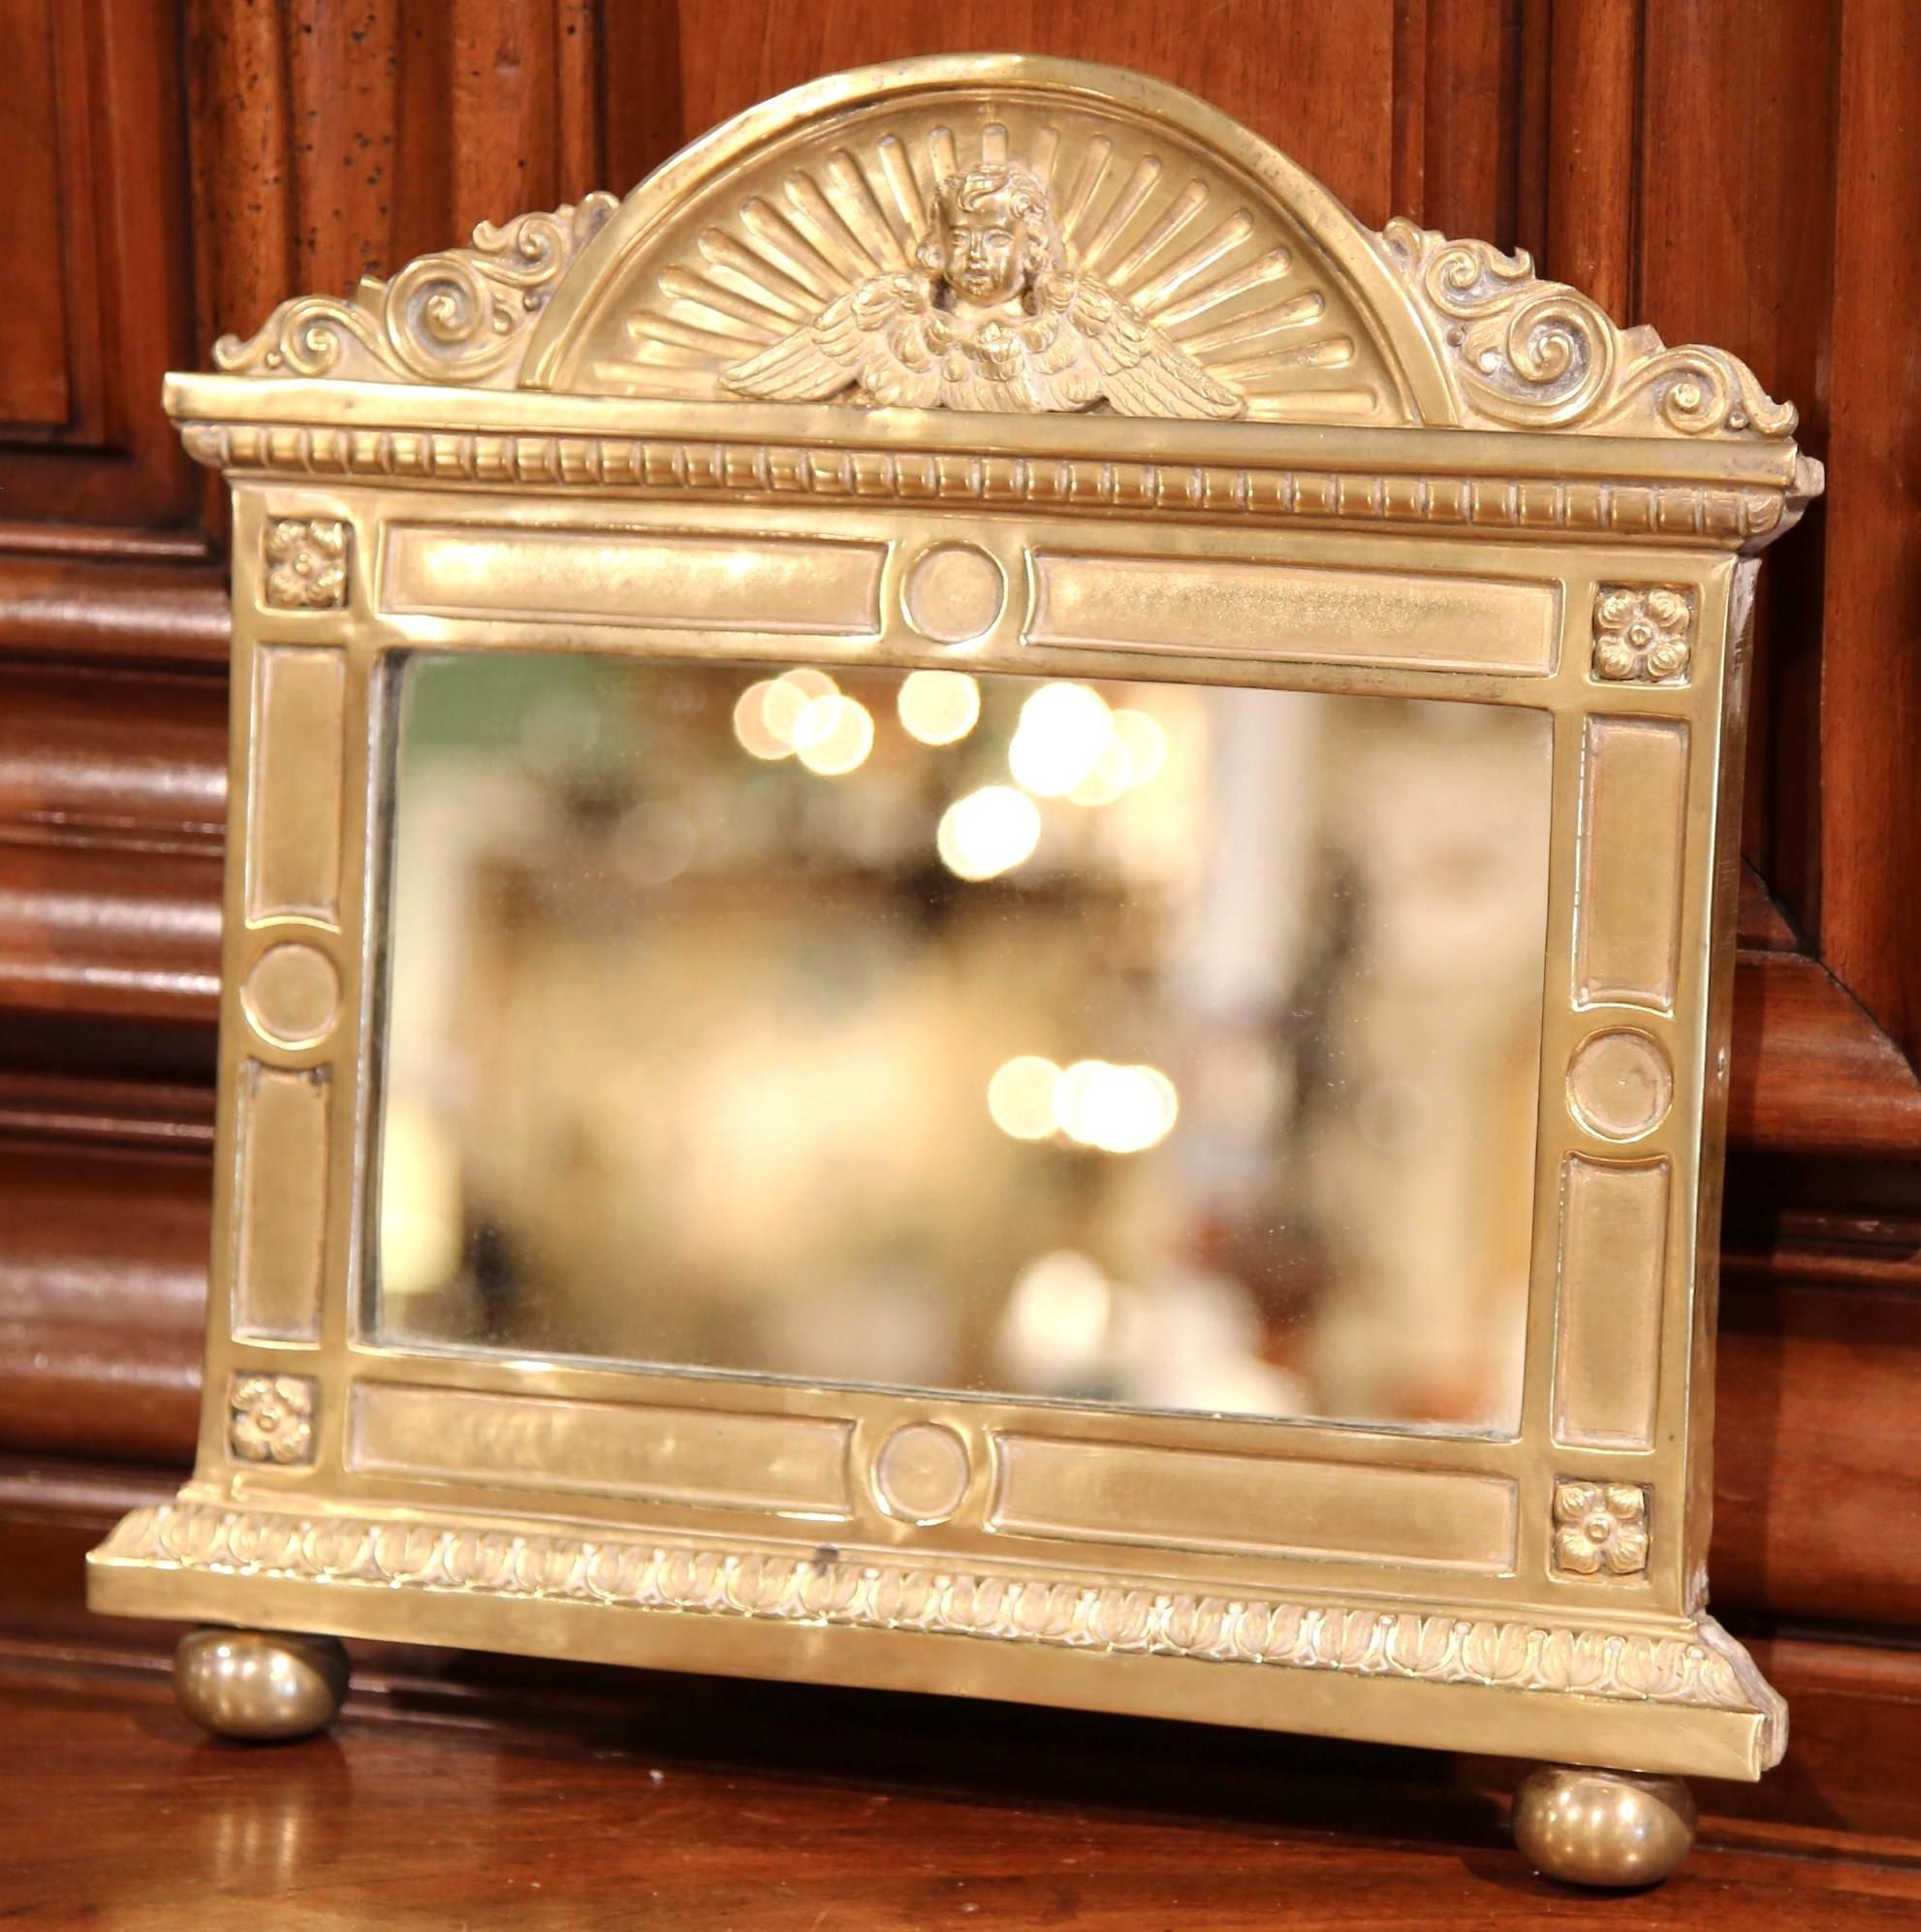 Hand-Crafted 19th Century French Repousse Brass Wall Mirror with Cherub Face Decor For Sale